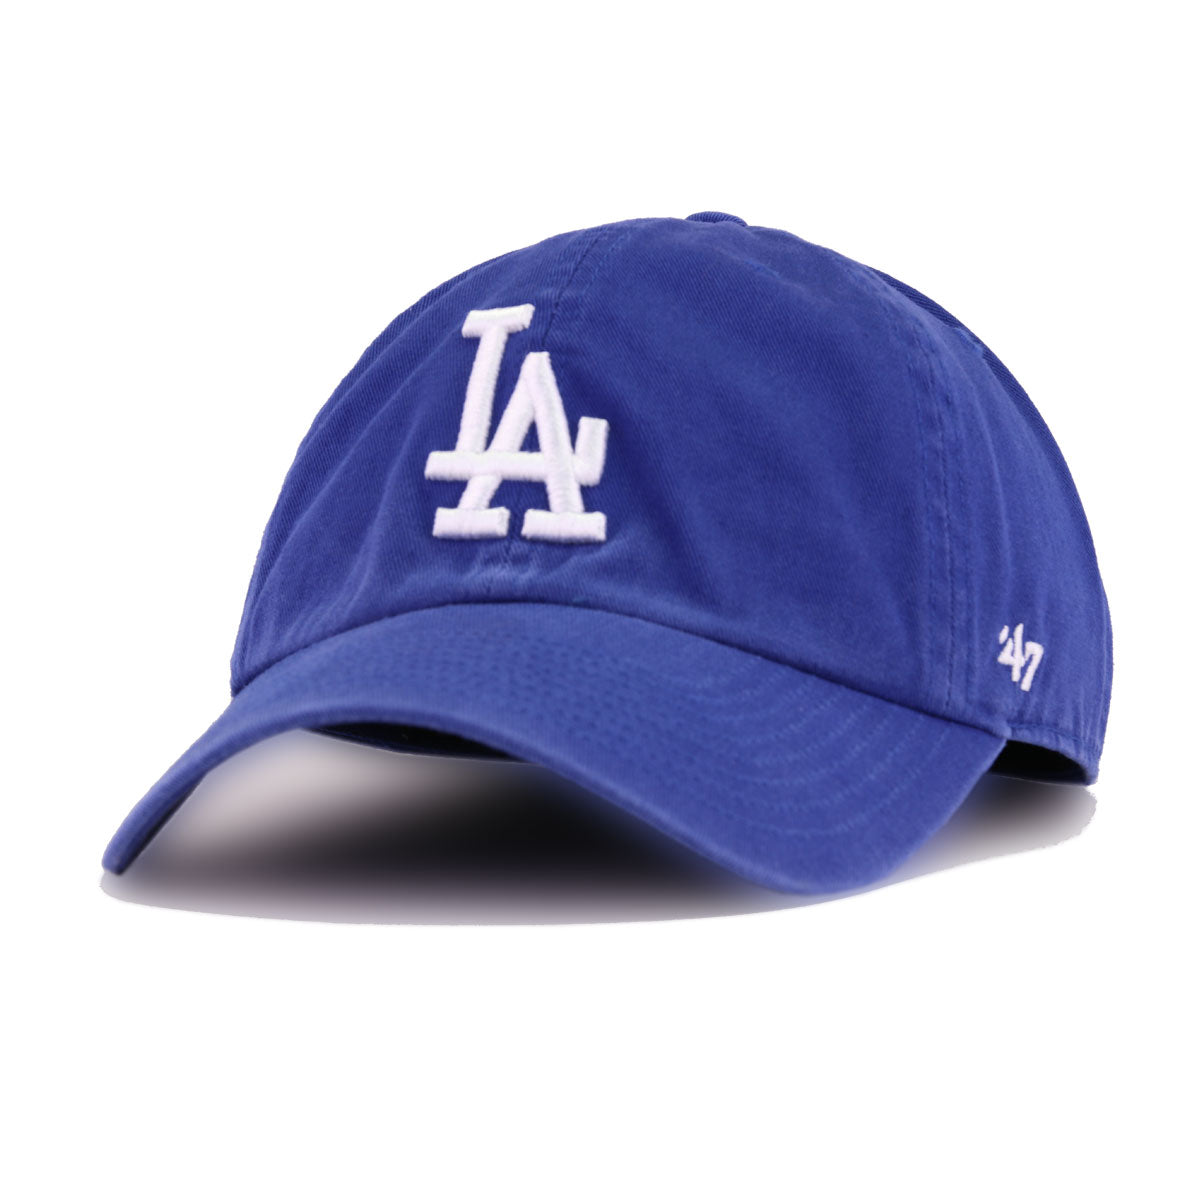 47 Los Angeles Dodgers Clean Up Dad Hat Baseball Cap - Columbia Blue